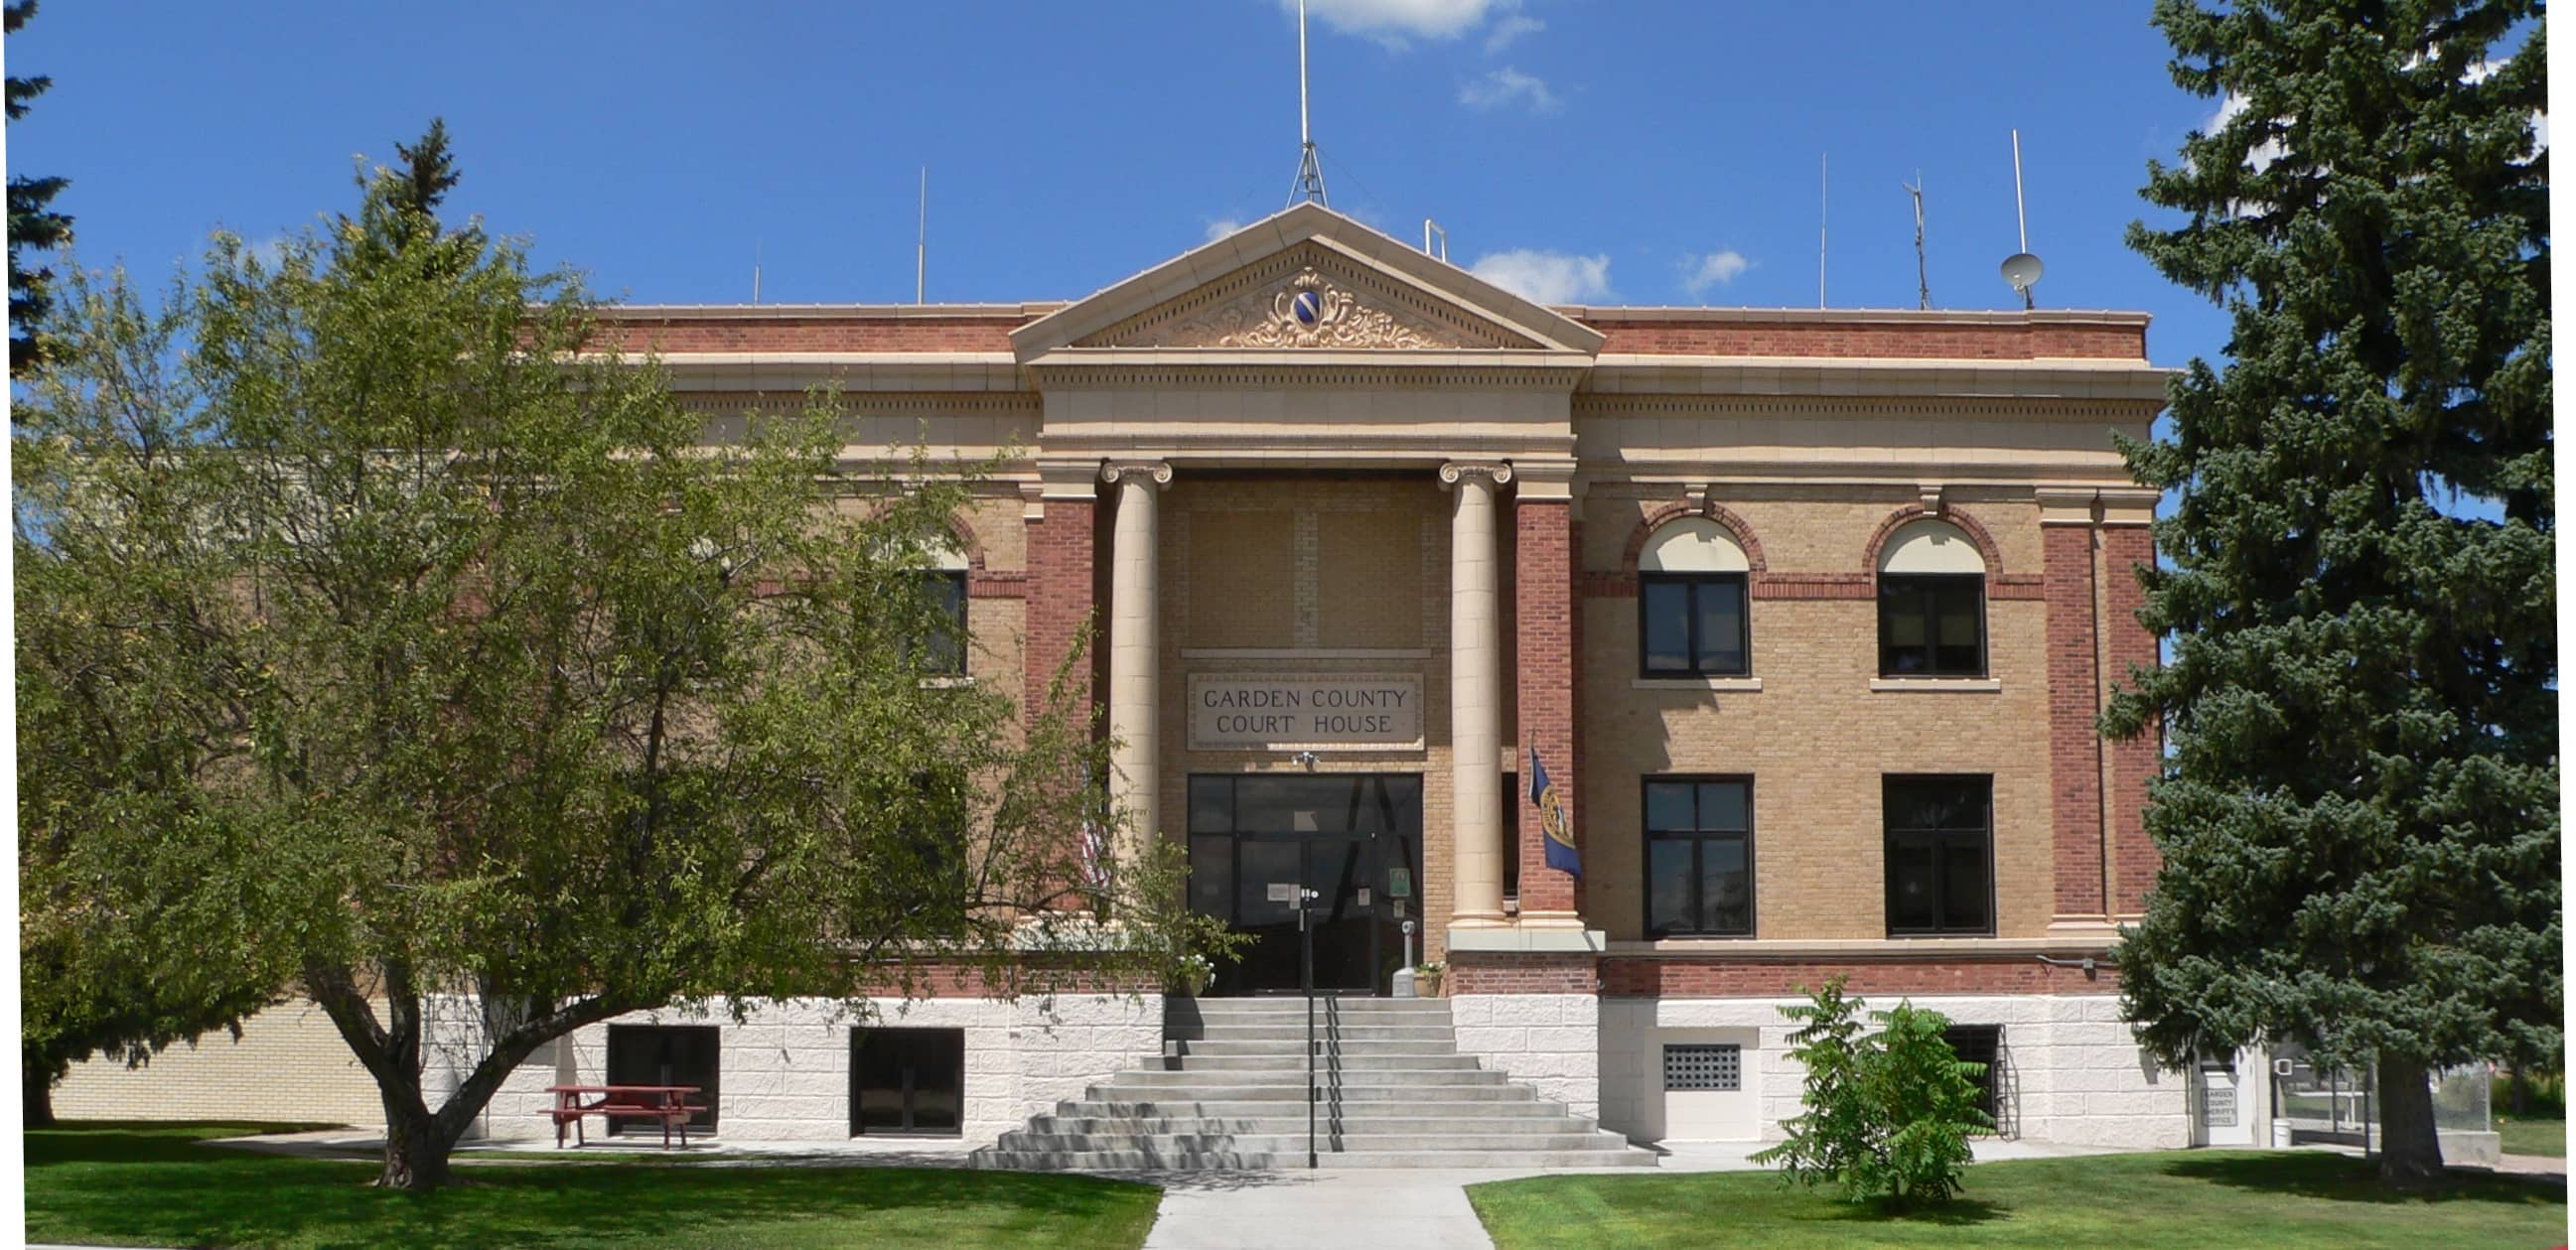 Image of County Court of Garden County